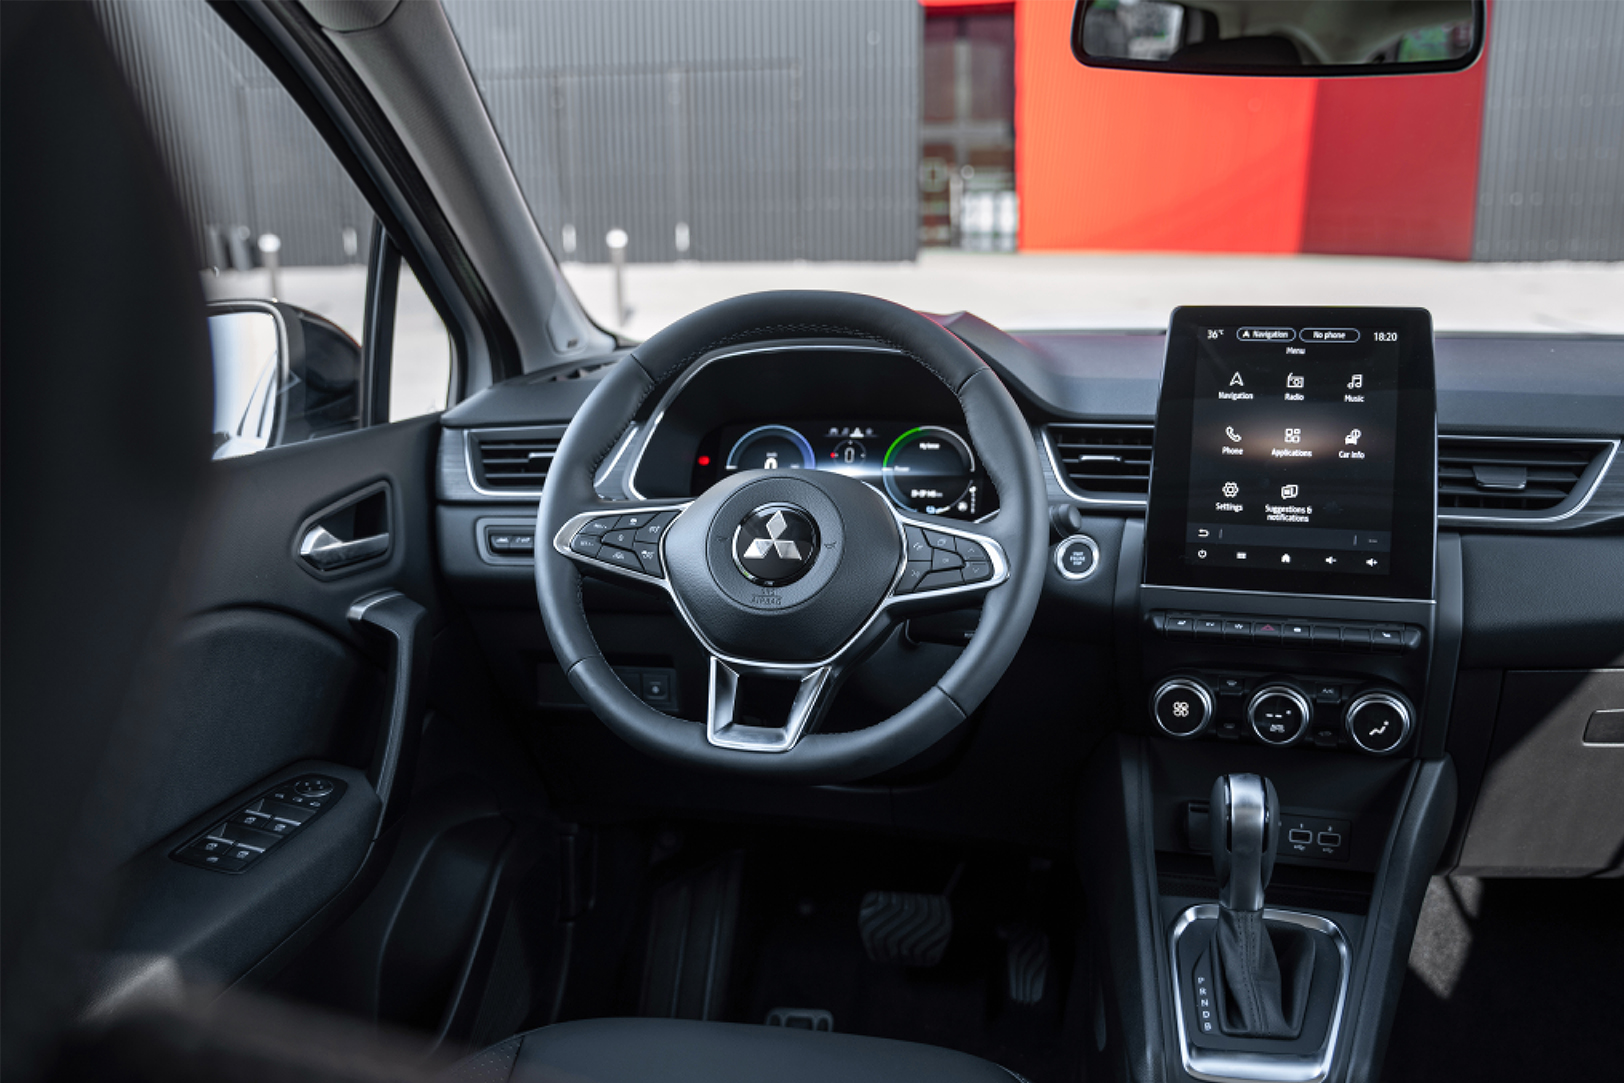 Inside, it shows the dashboard and steering wheel of the 2023 Mitsubishi ASX 